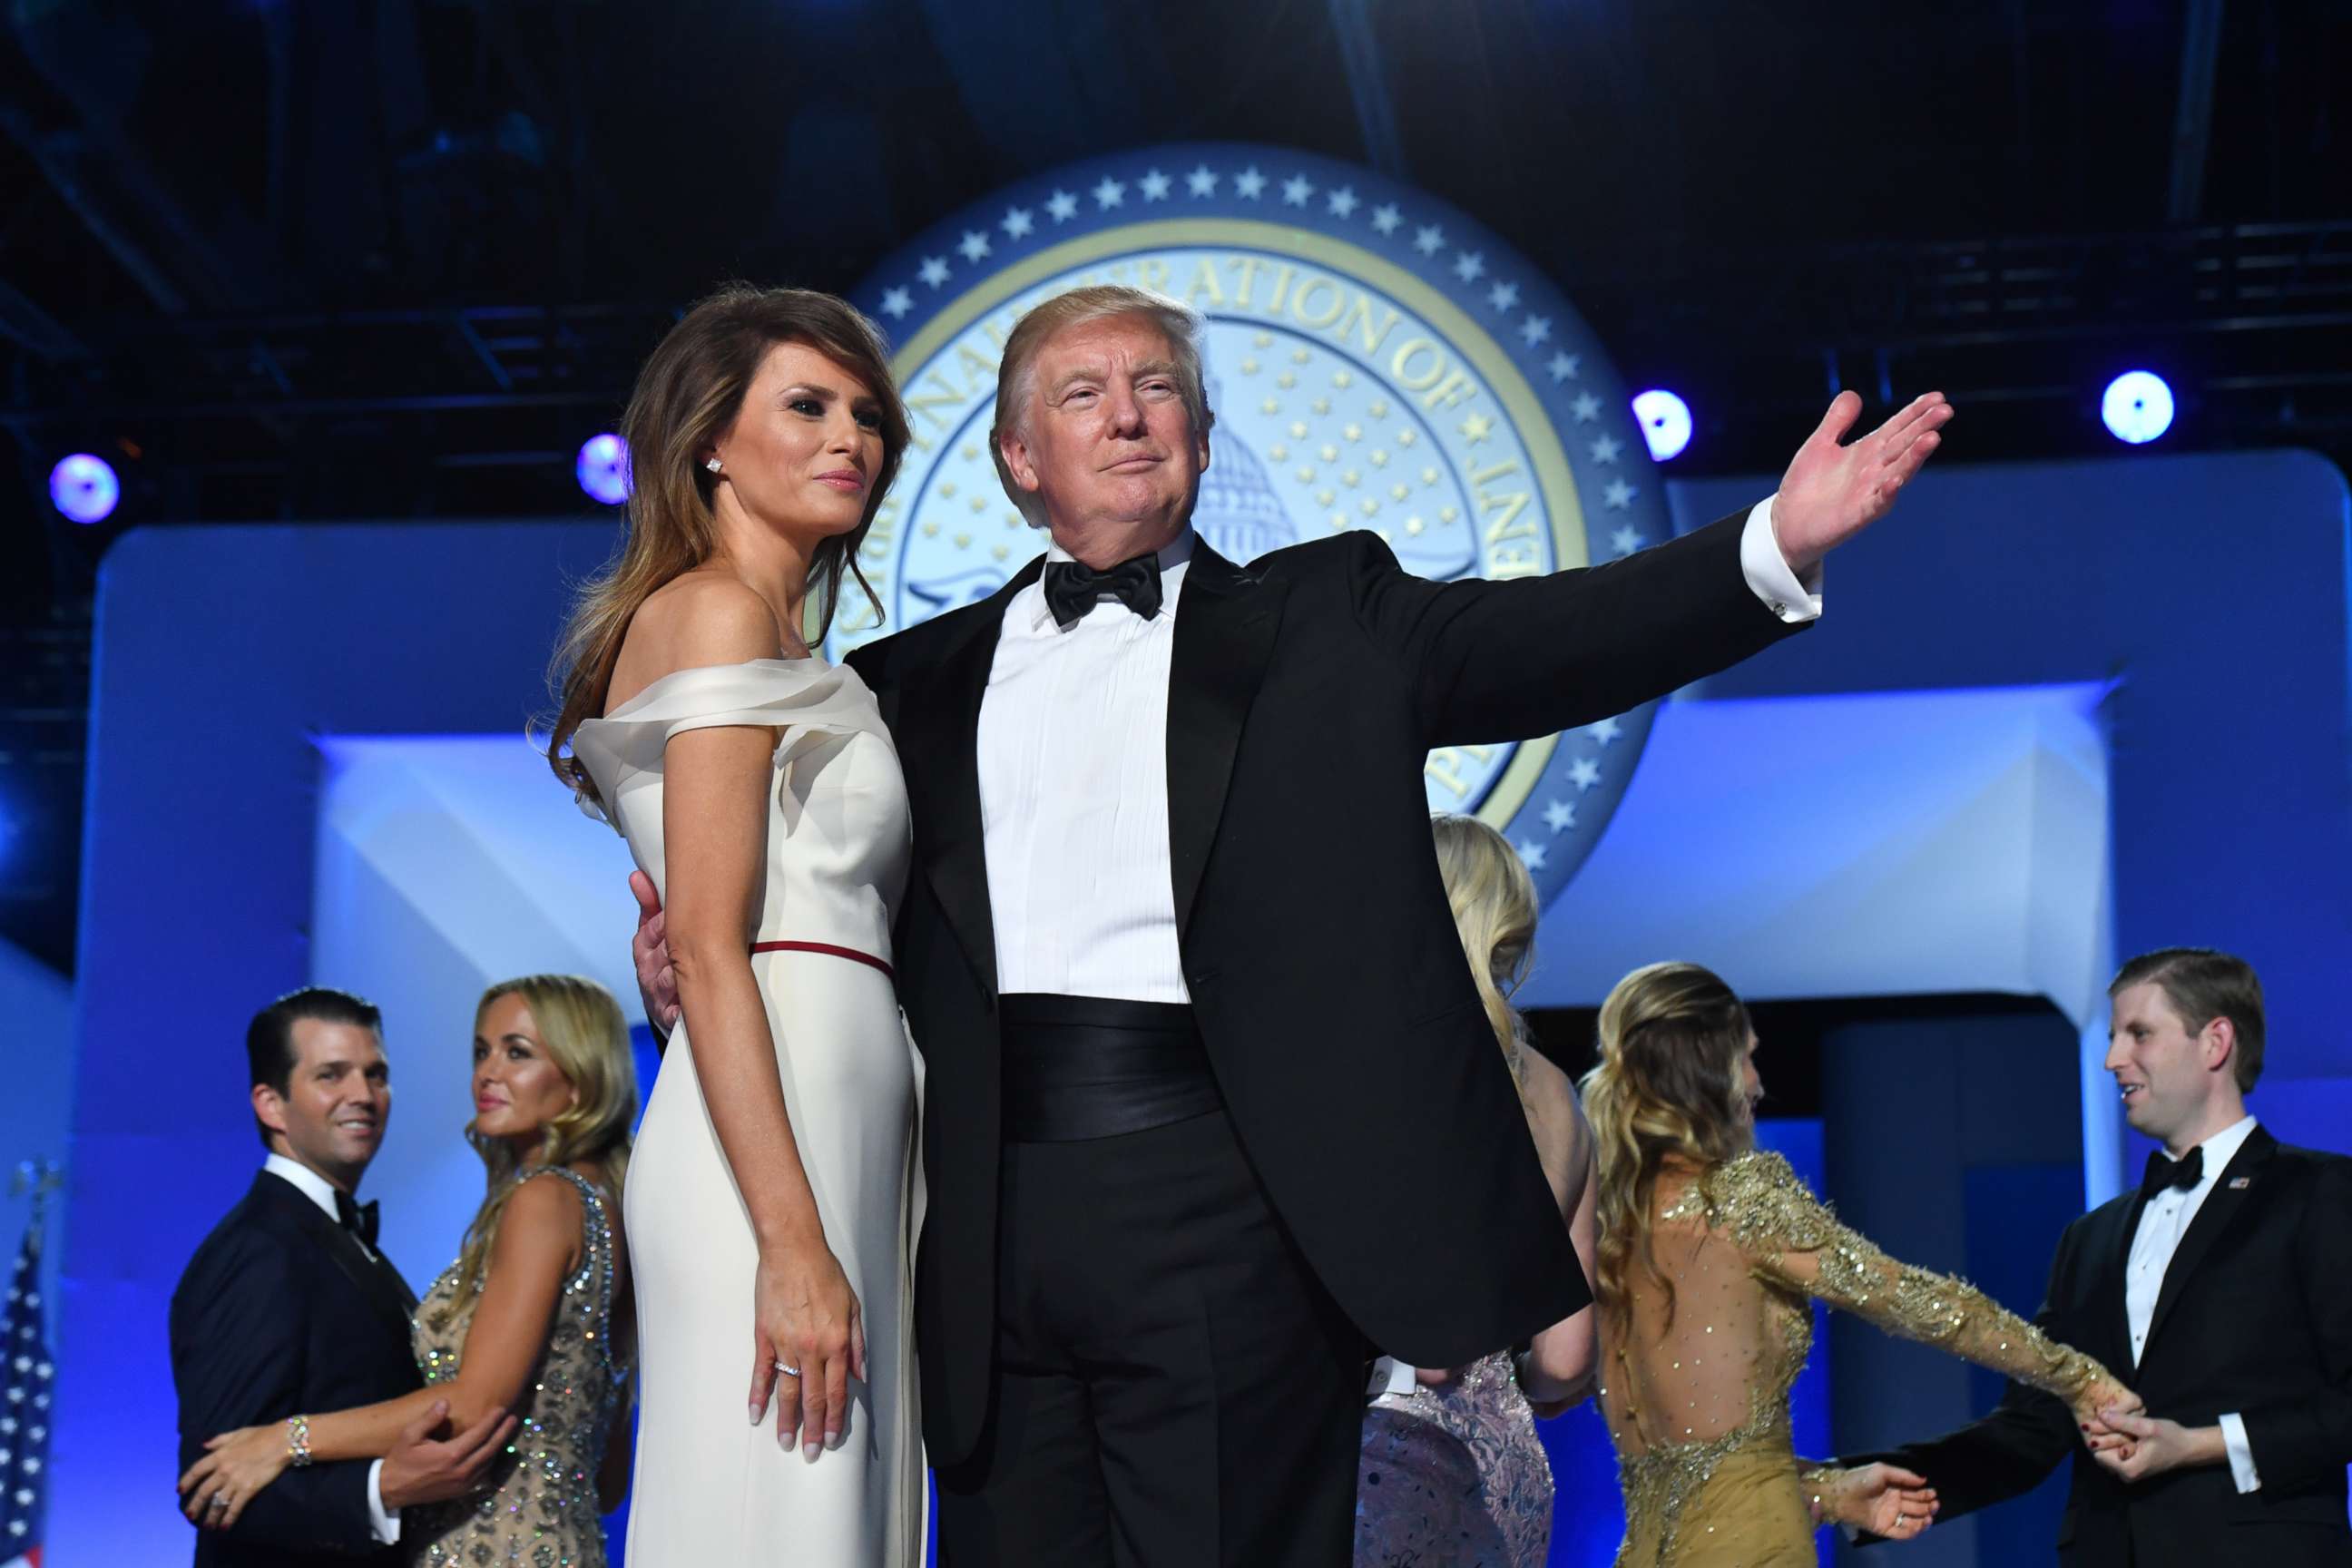 PHOTO: President Donald Trump and First Lady Melania Trump dance at the Freedom Ball on Jan. 20, 2017 in Washington.